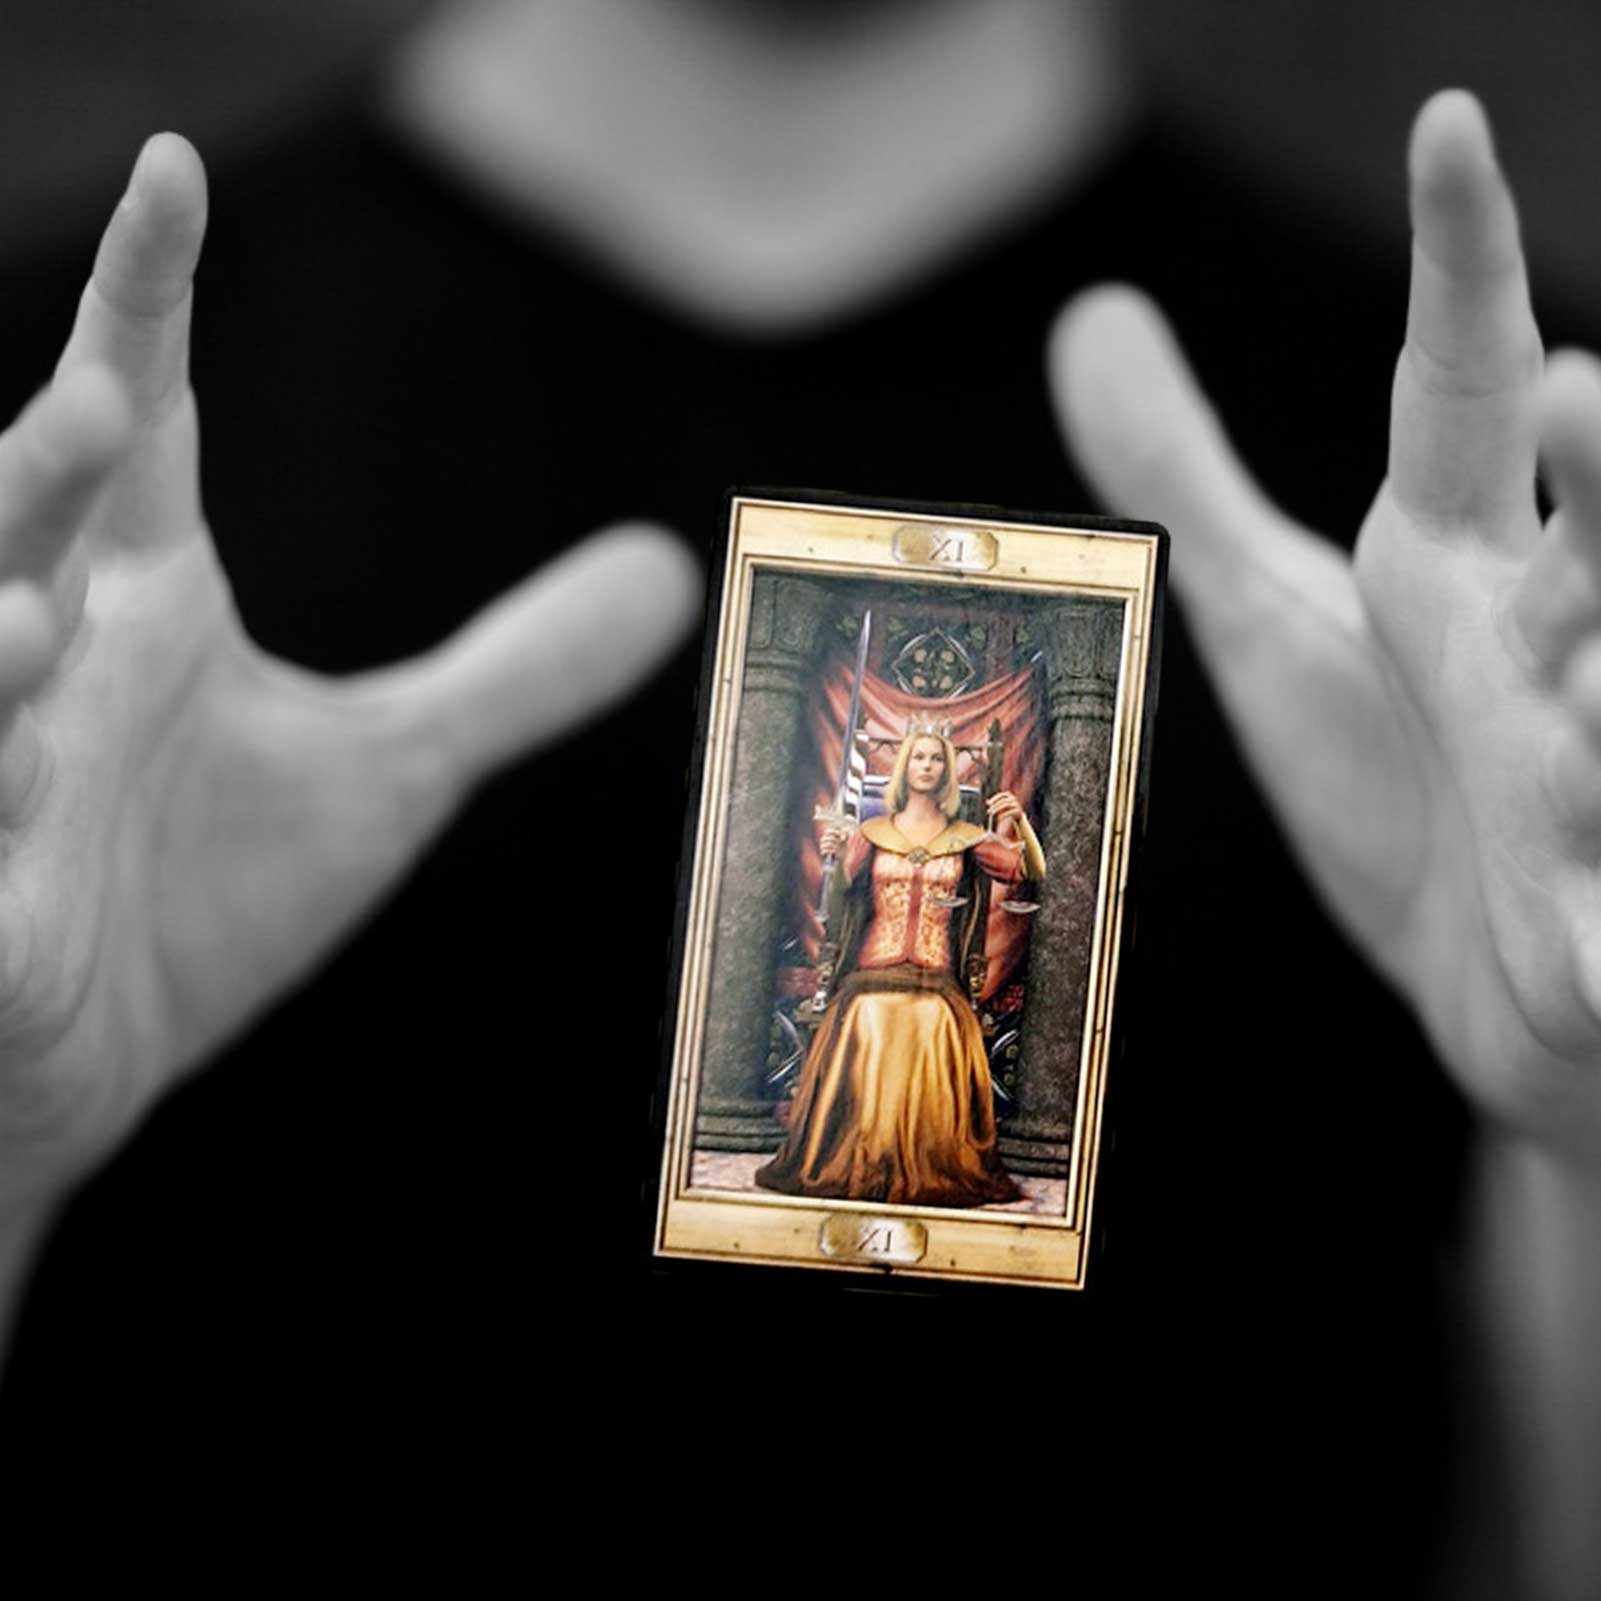 The Pictorial Key Tarot Cards